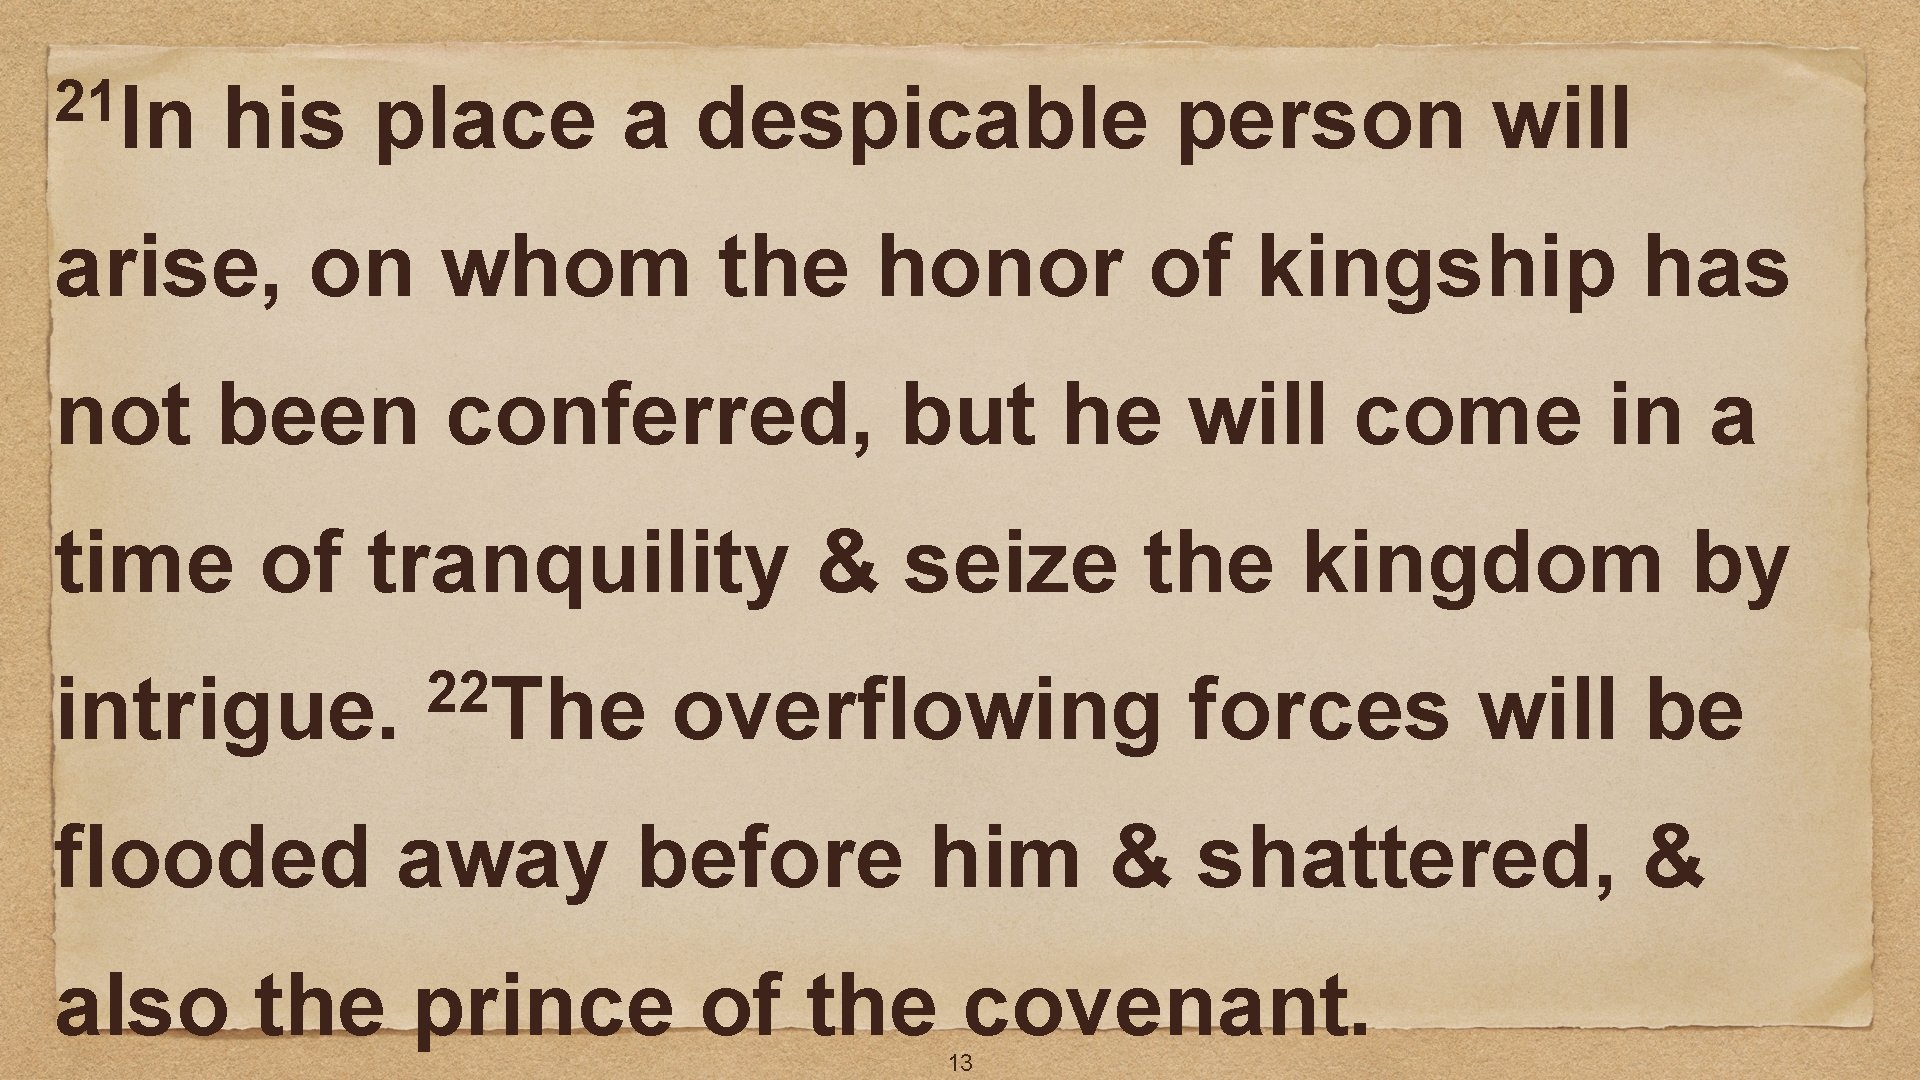 21 In his place a despicable person will arise, on whom the honor of